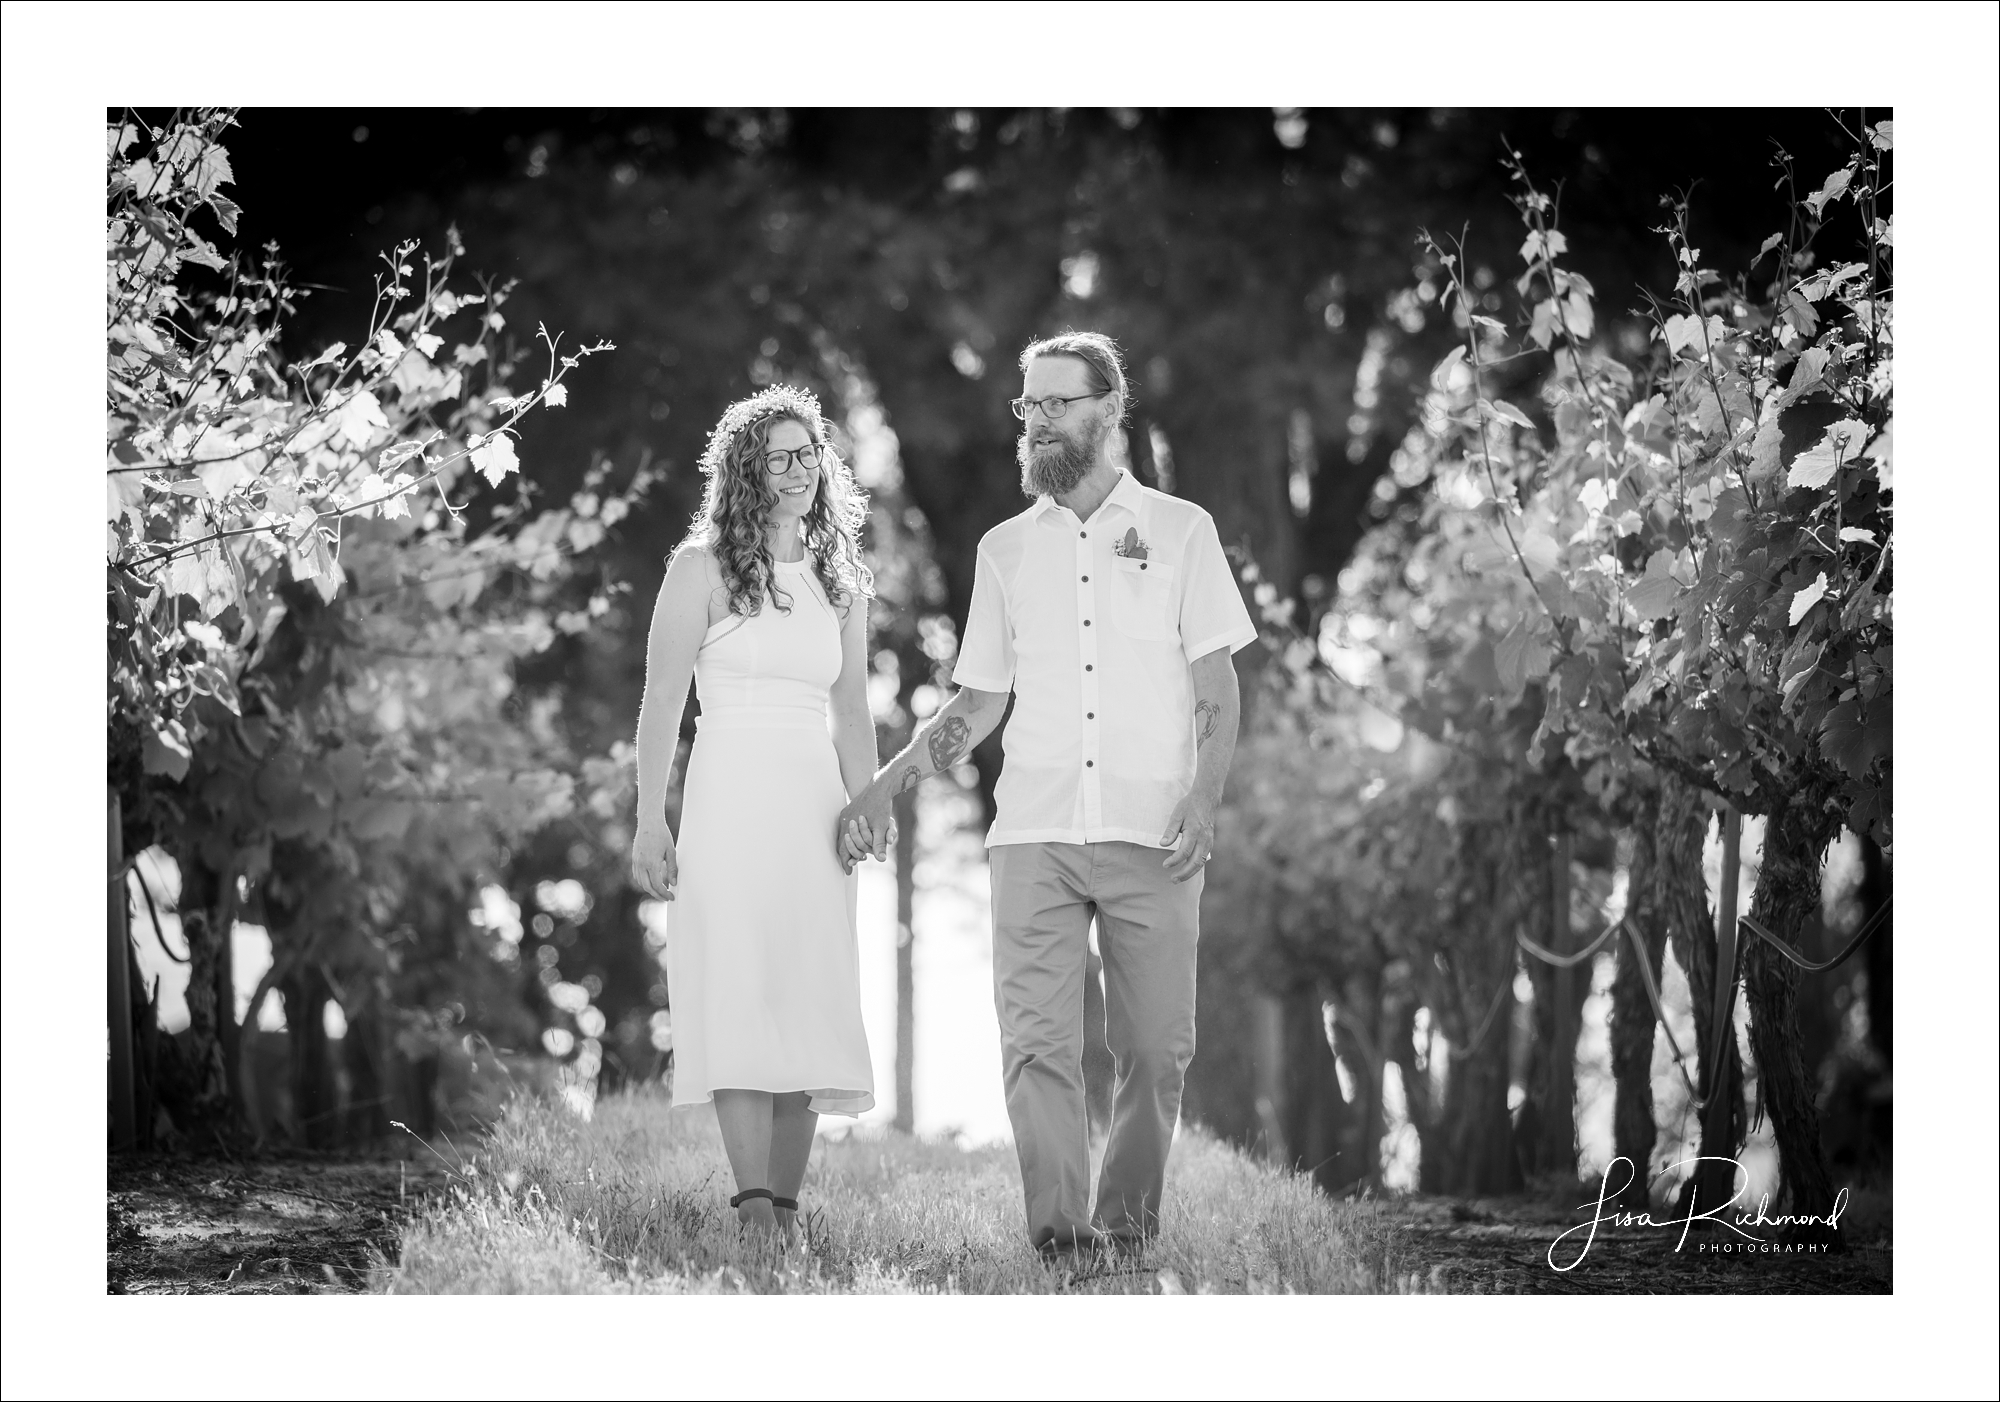 Whitney and Spencer celebrate their marriage at Sierra Vista Vineyards